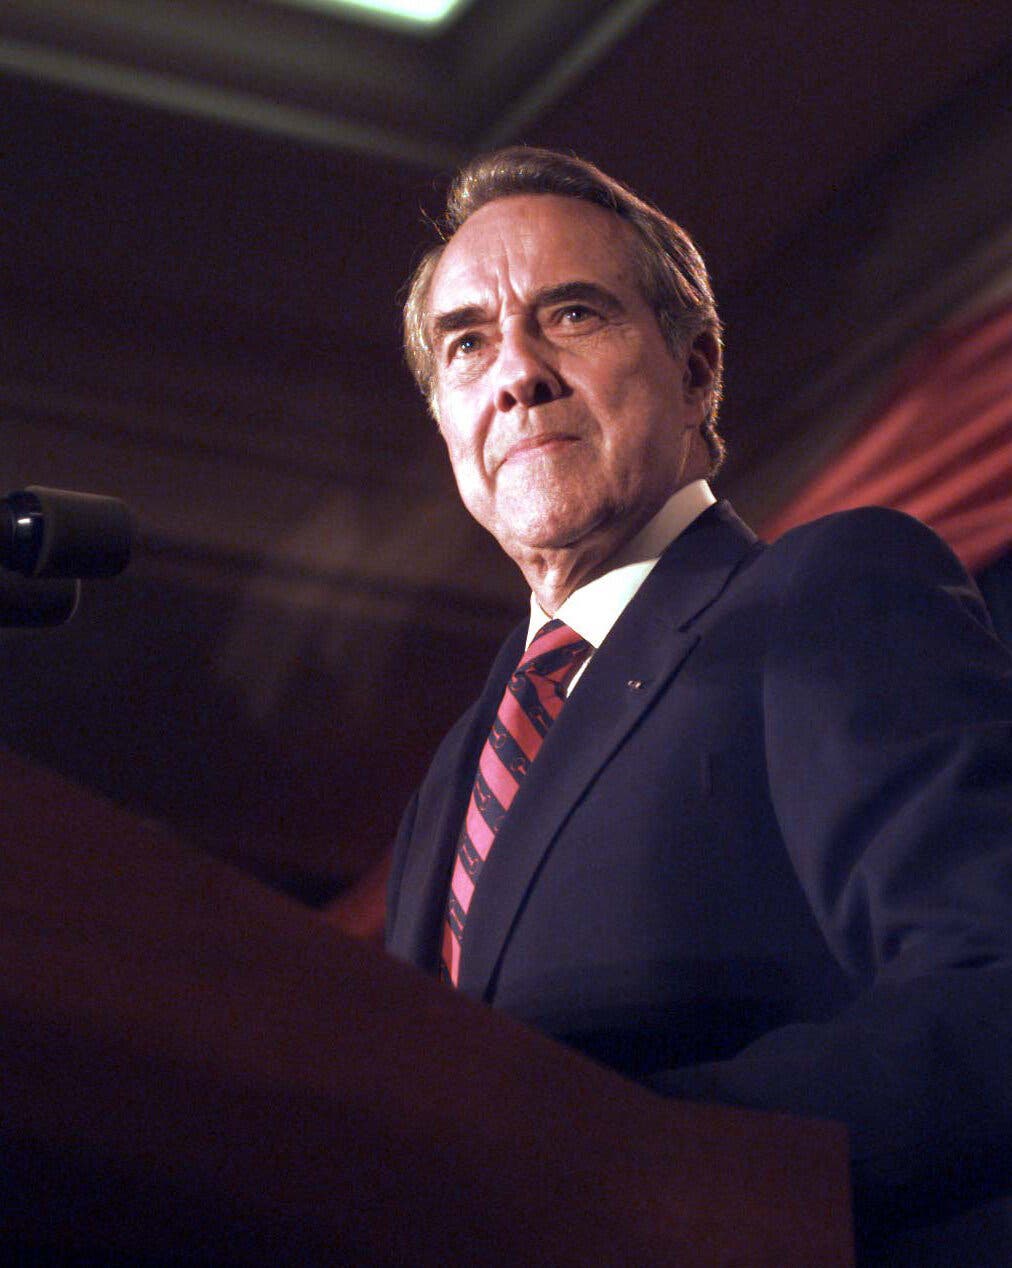 Bob Dole, Old Soldier and Stalwart of the Senate, Dies at 98